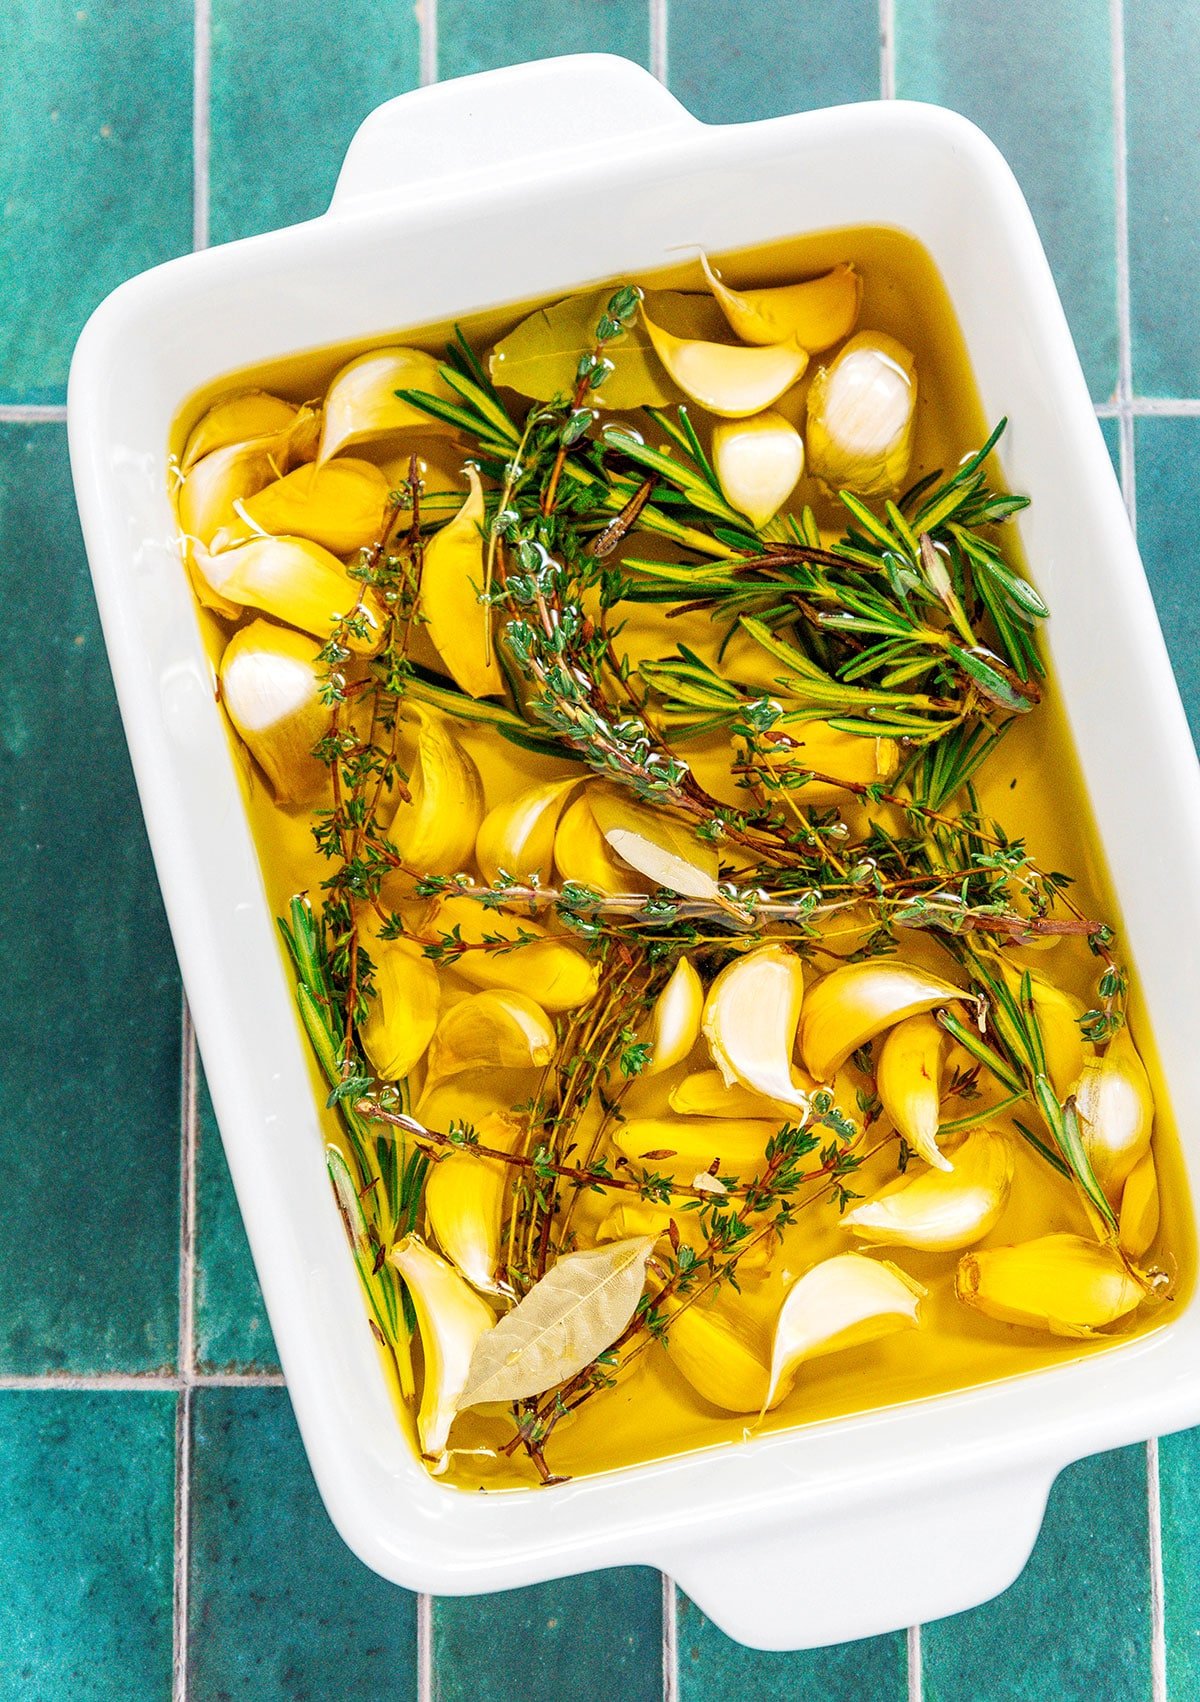 A casserole dish filled with garlic cloves soaking in olive oil and topped with fresh thyme, rosemary, and bay leaves